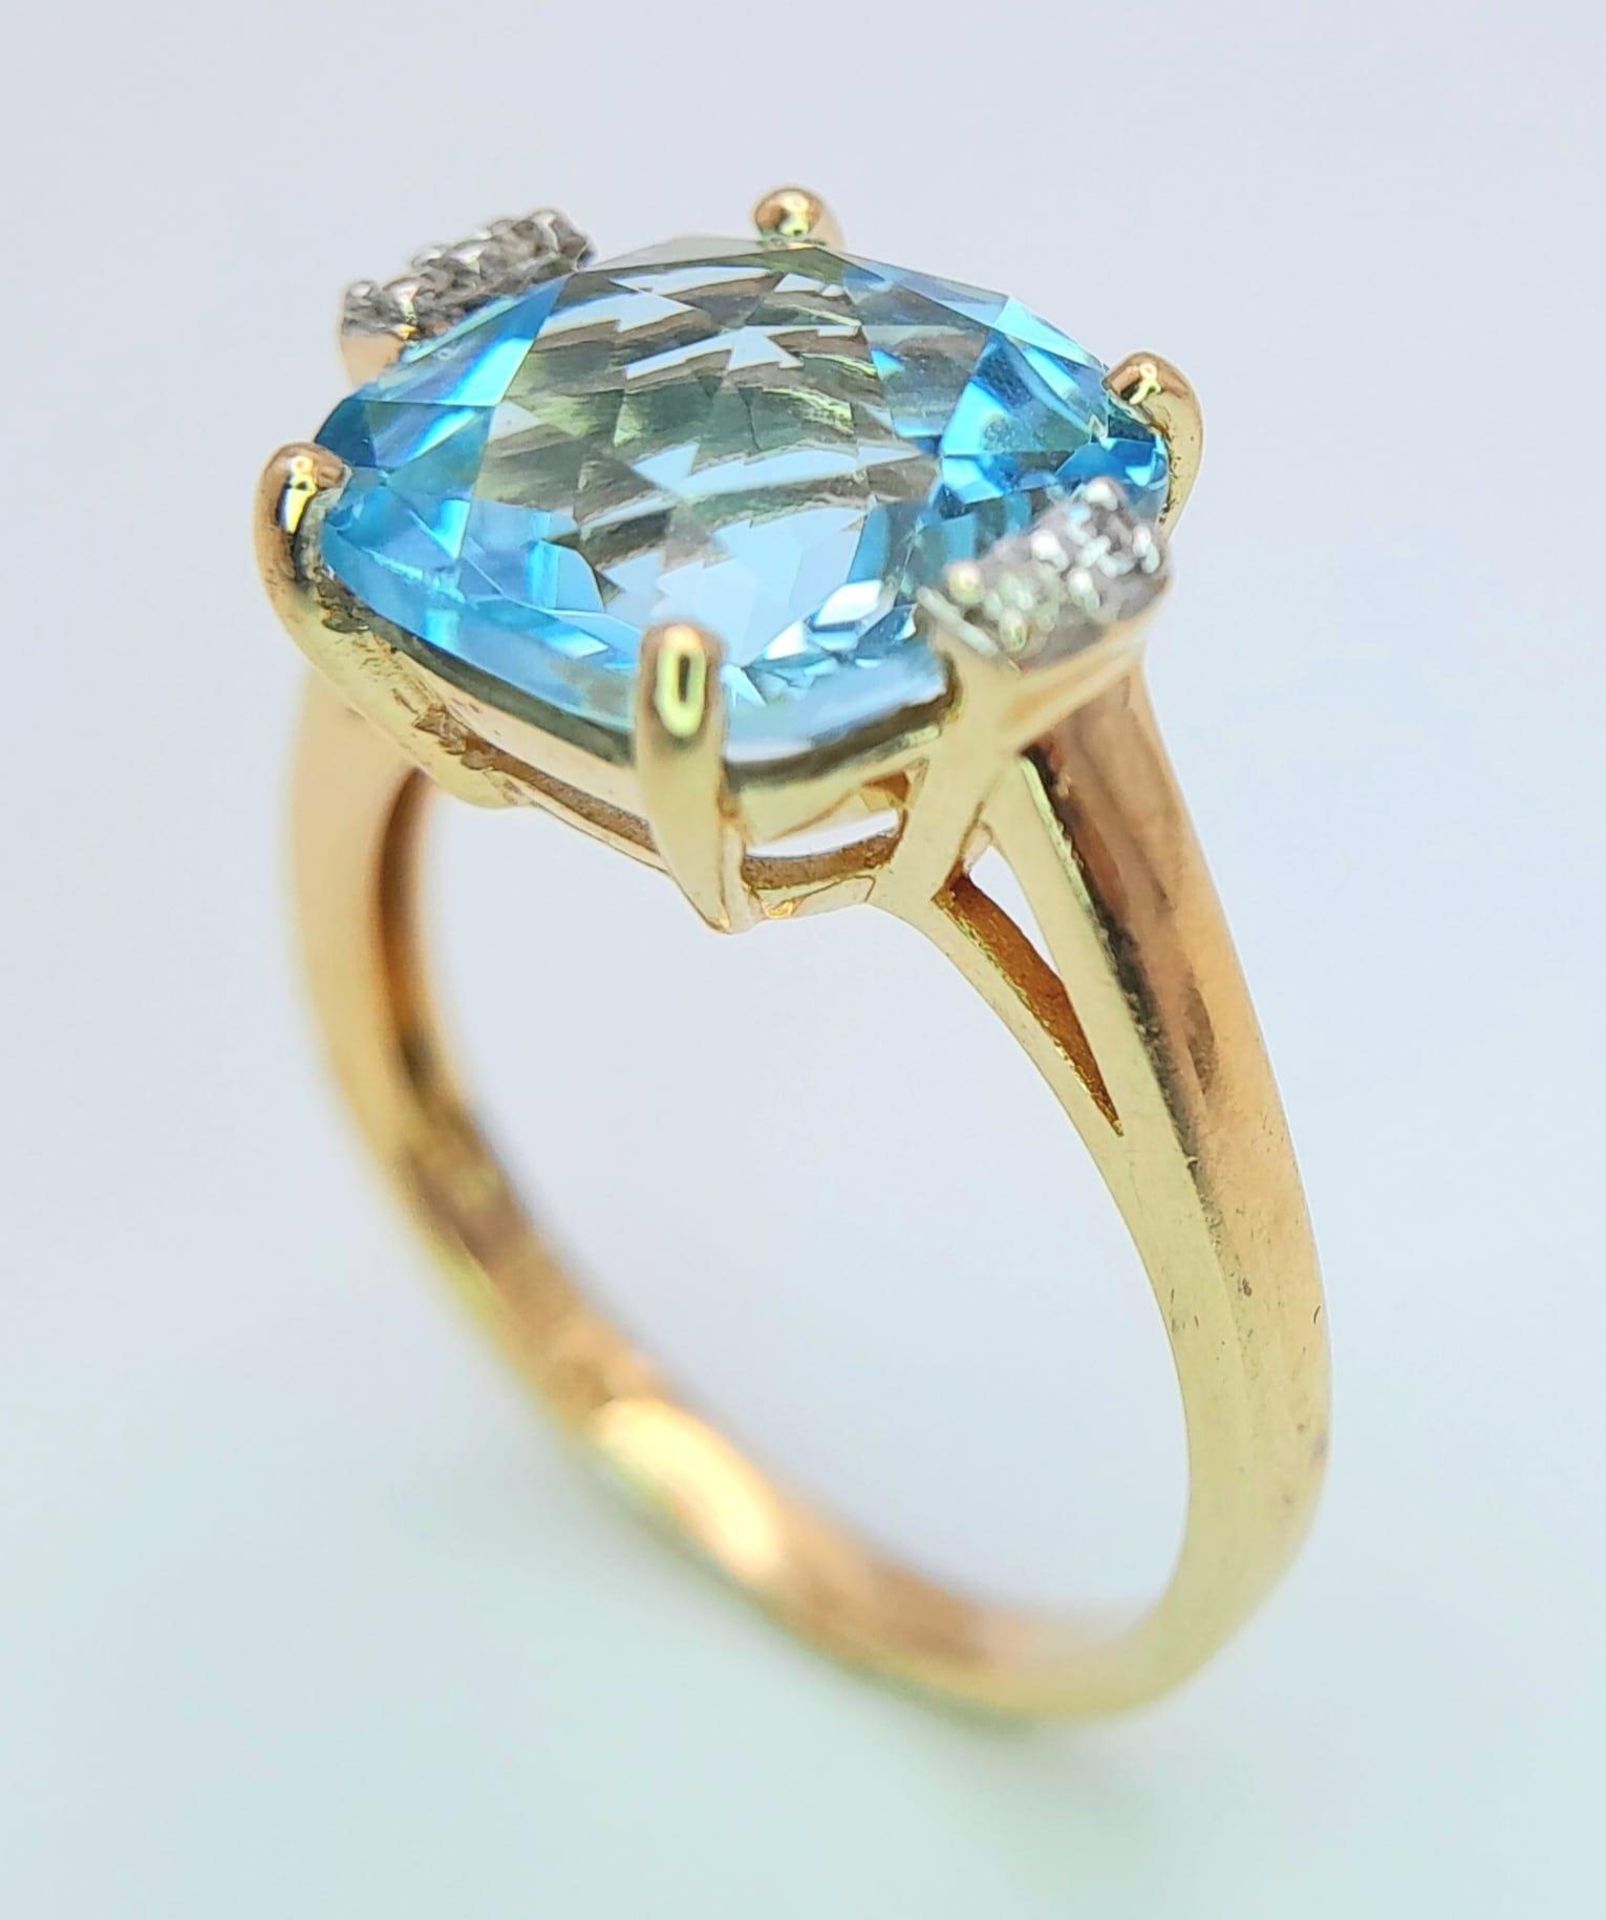 A very attractive 14 K yellow gold ring with a large, cushion cut aquamarine and a pair of - Image 6 of 14